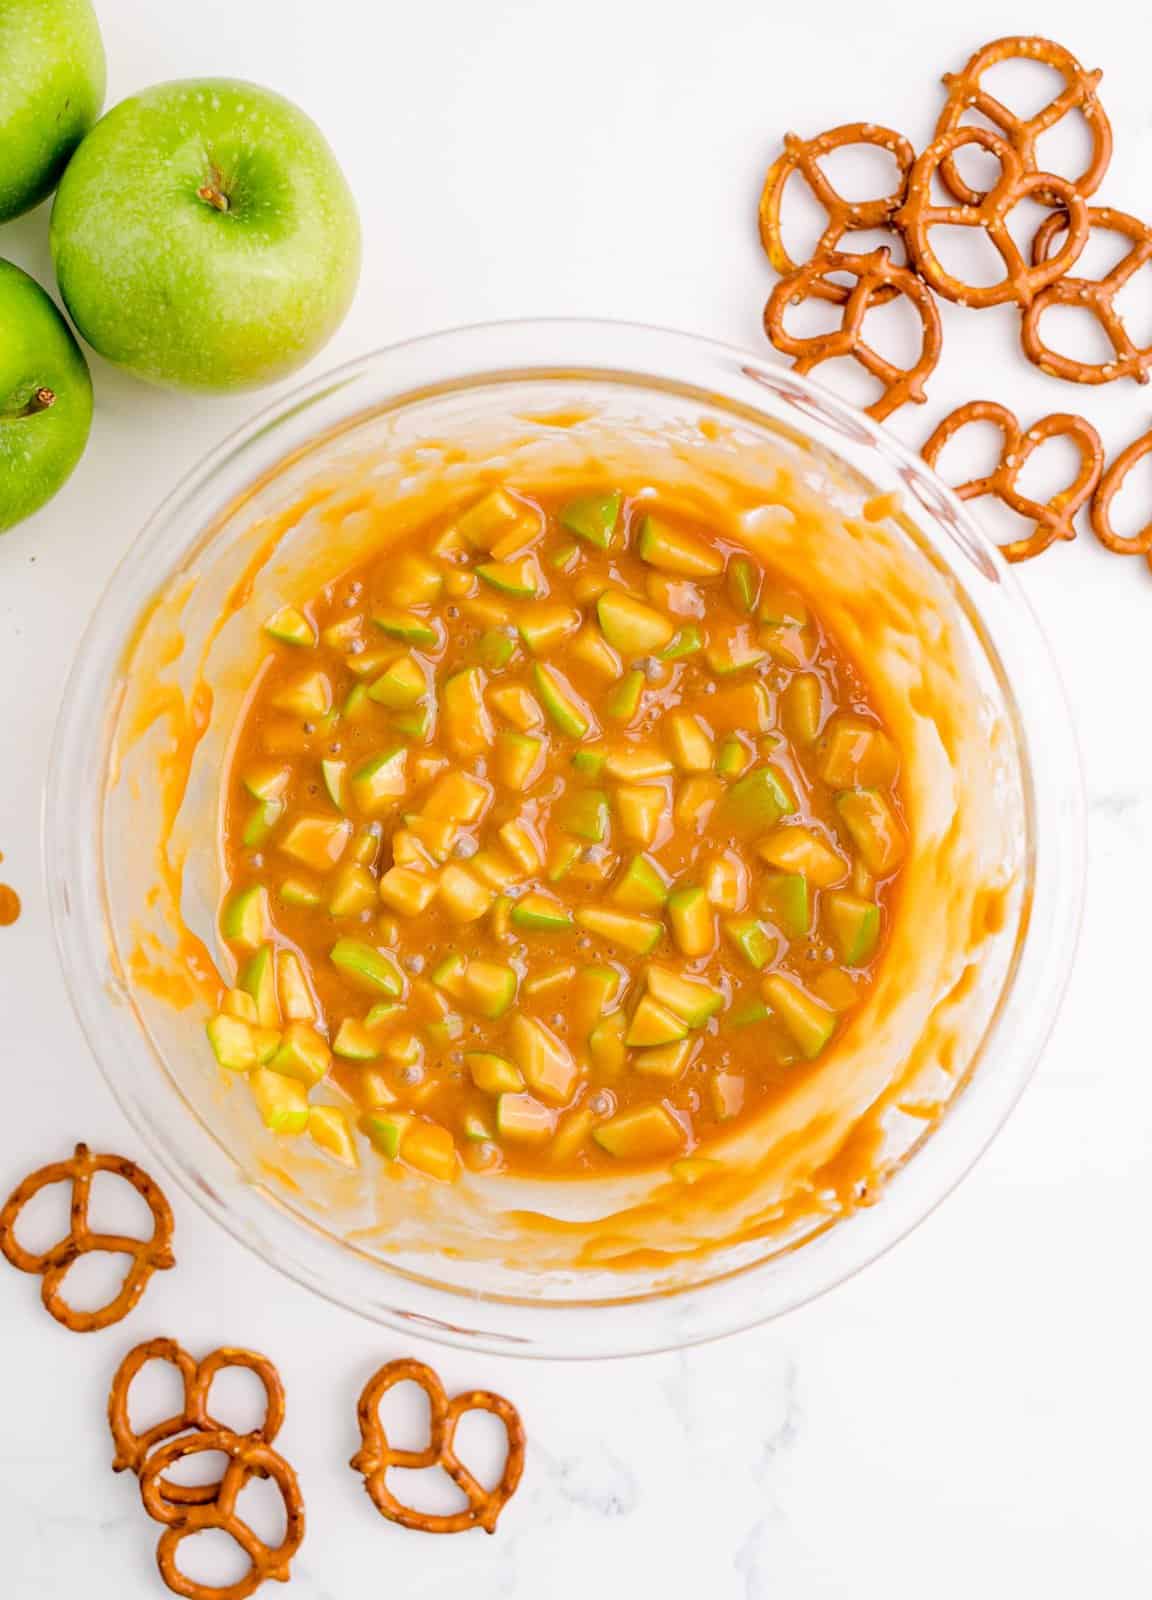 Caramel and apples mixed together in bowl.